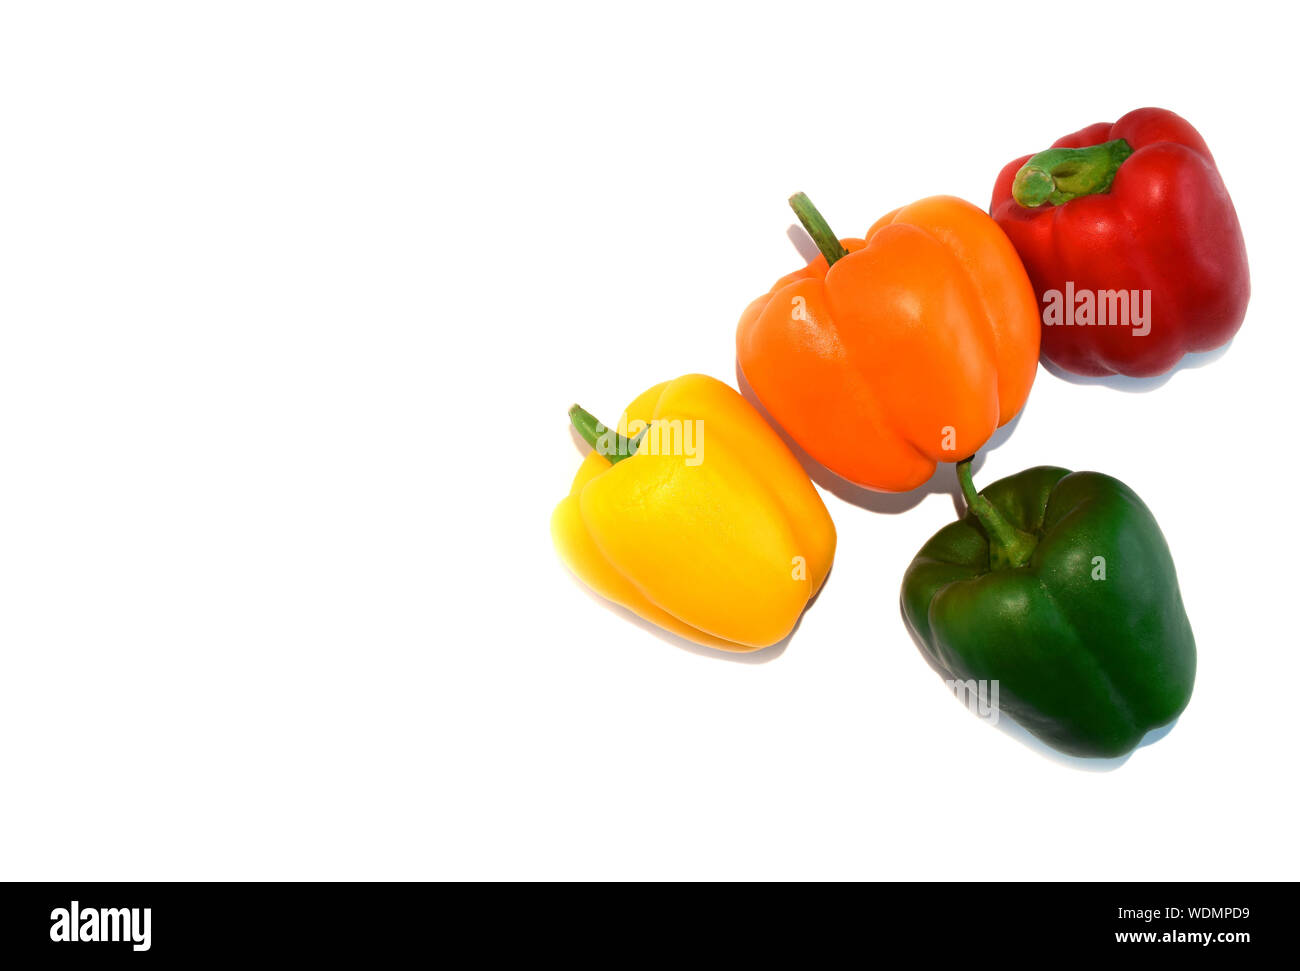 Fresh vegetables. Orange, yellow, green, red bell peppers or capsicum isolated on white background, copy space Stock Photo